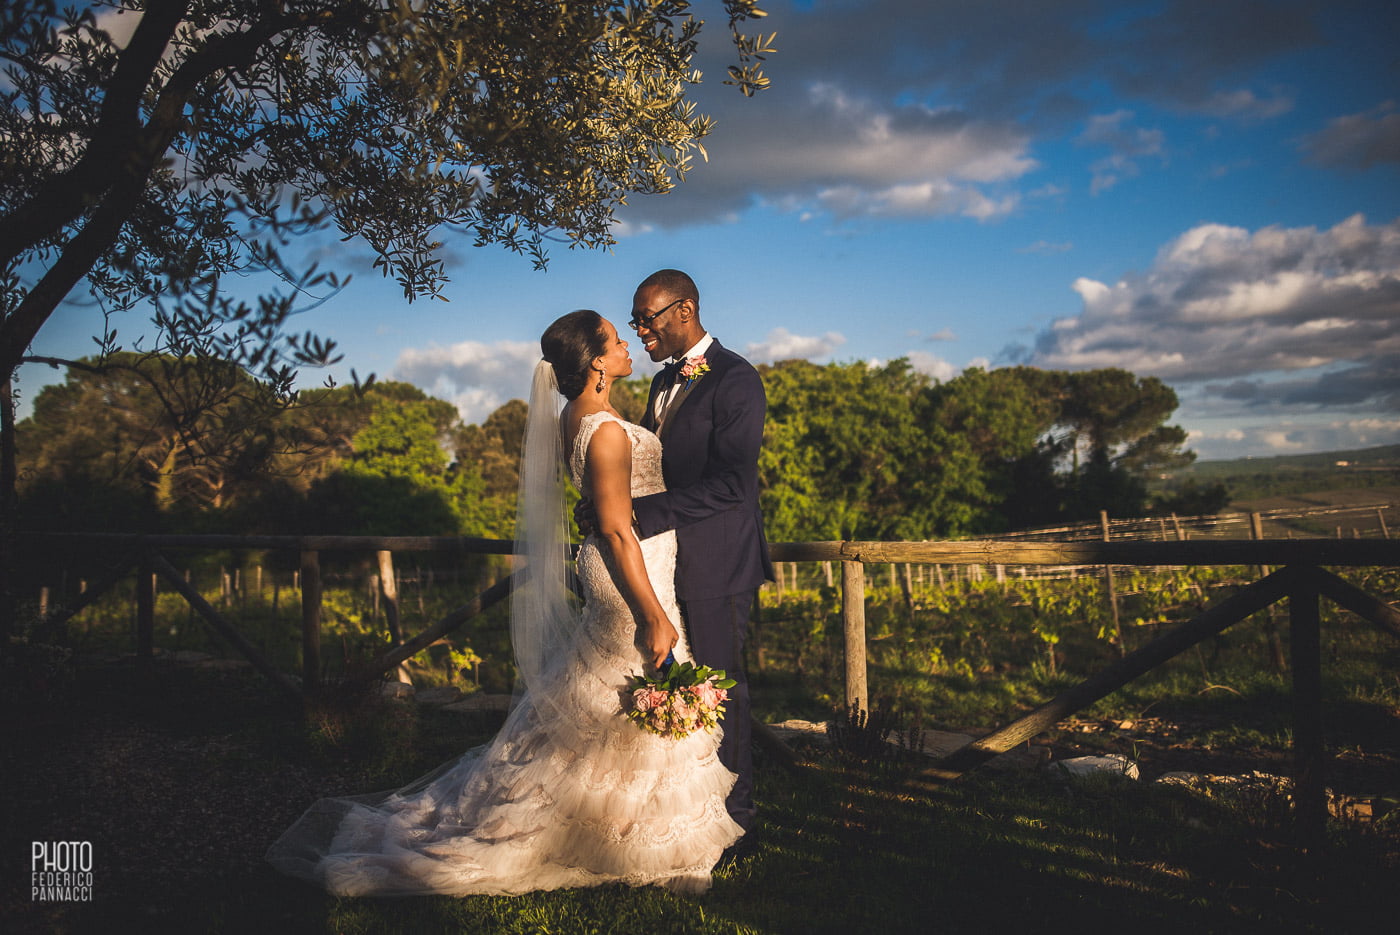 A+J Wedding at the Sunrise in Chiantishire 85